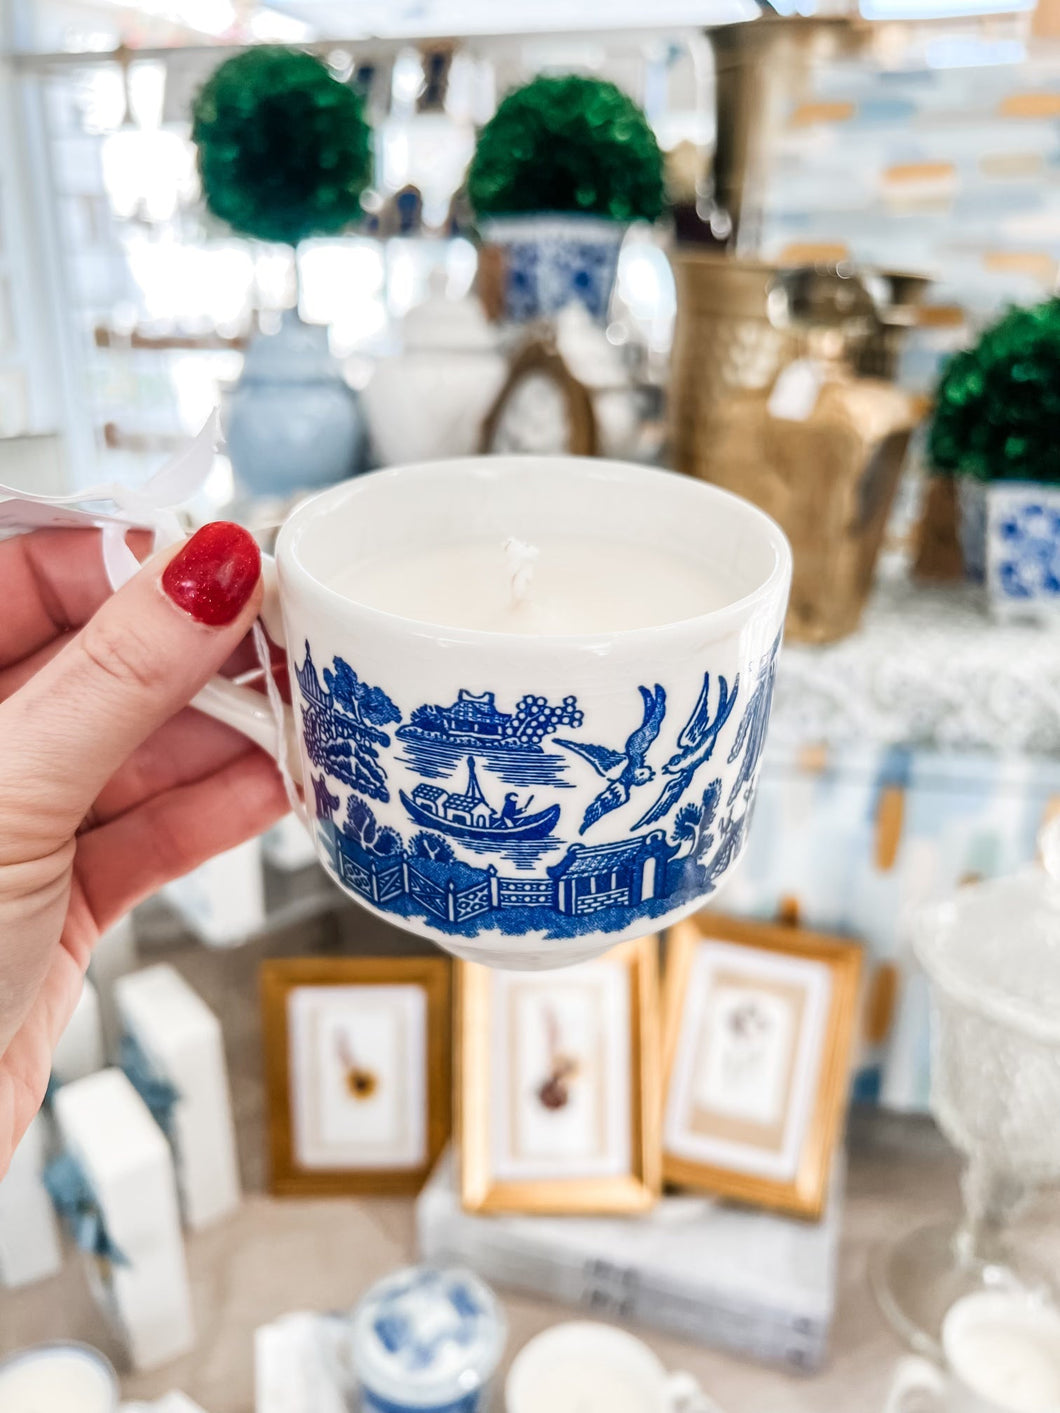 My Heart Blue and White Tea Cup B scented candle-Belle Reve Designs by Megan Gatte